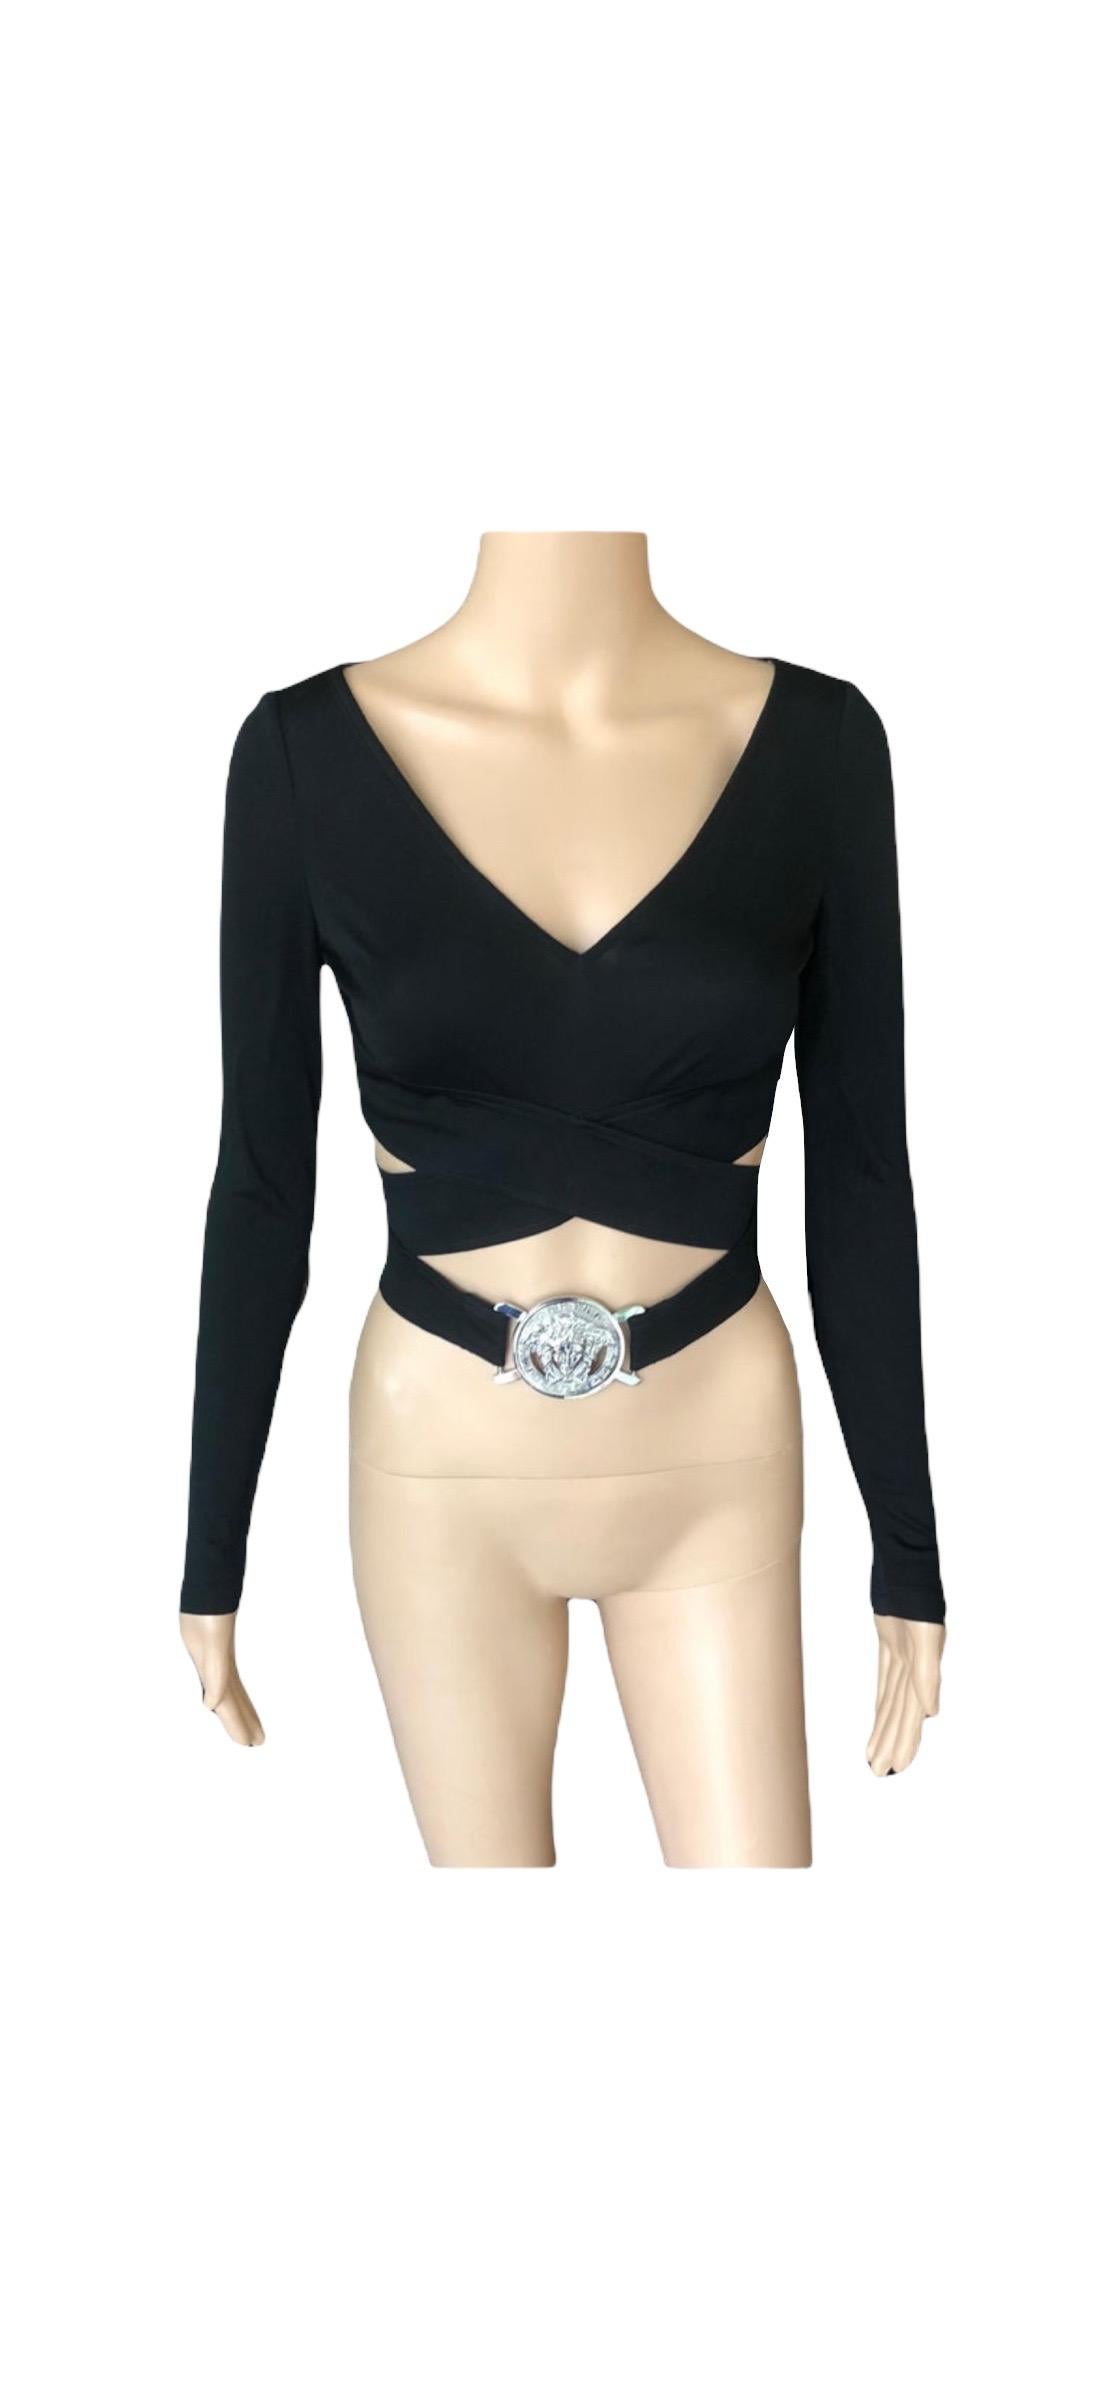 Versace S/S 2005 Embellished Belted Plunging Wrap Crop Top For Sale 2